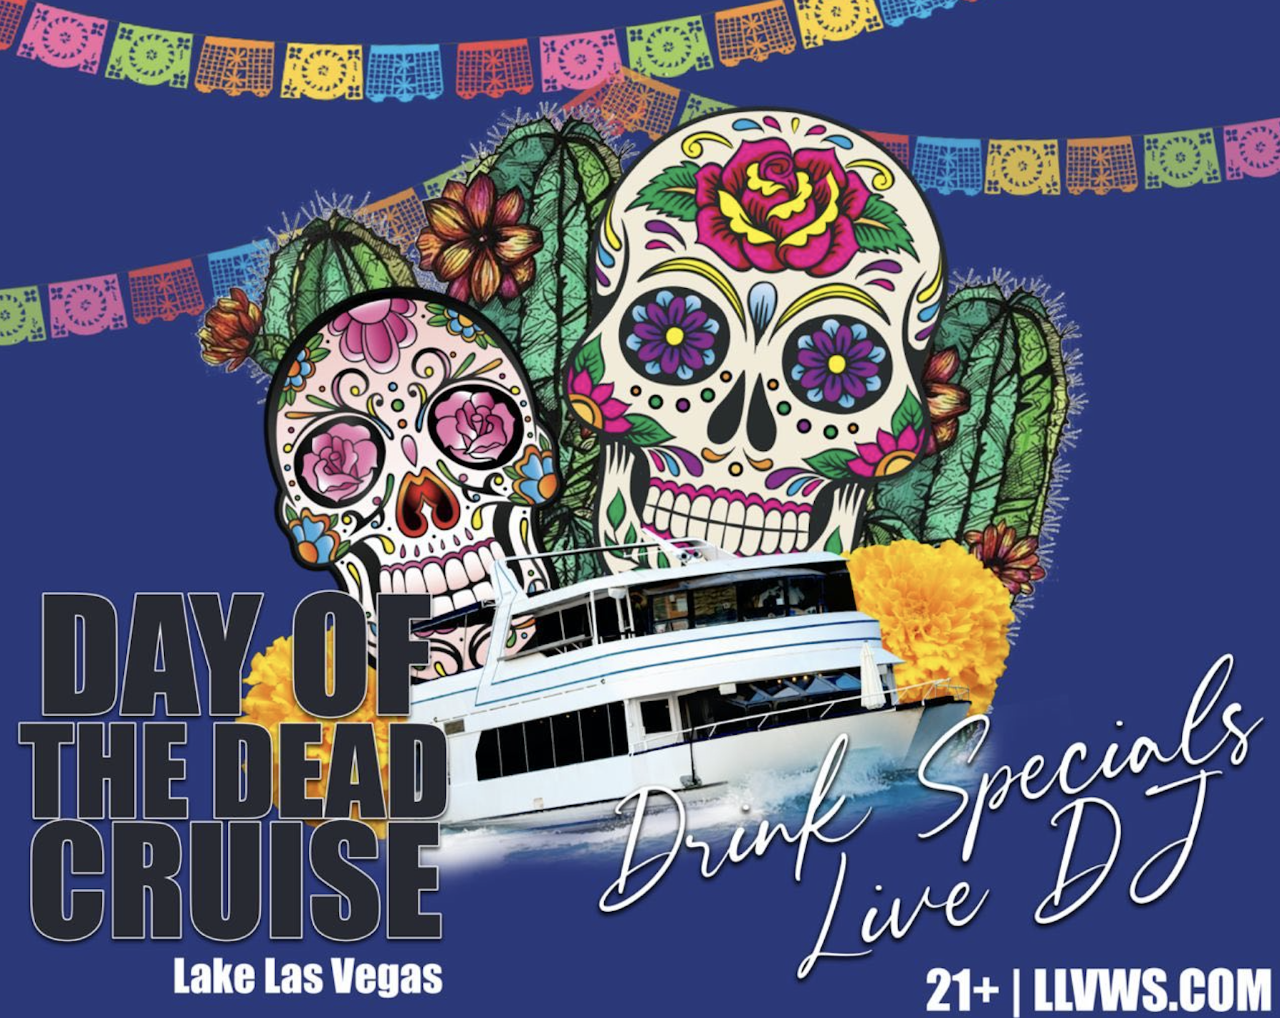 Day Of The Dead Cruise at Lake Las Vegas